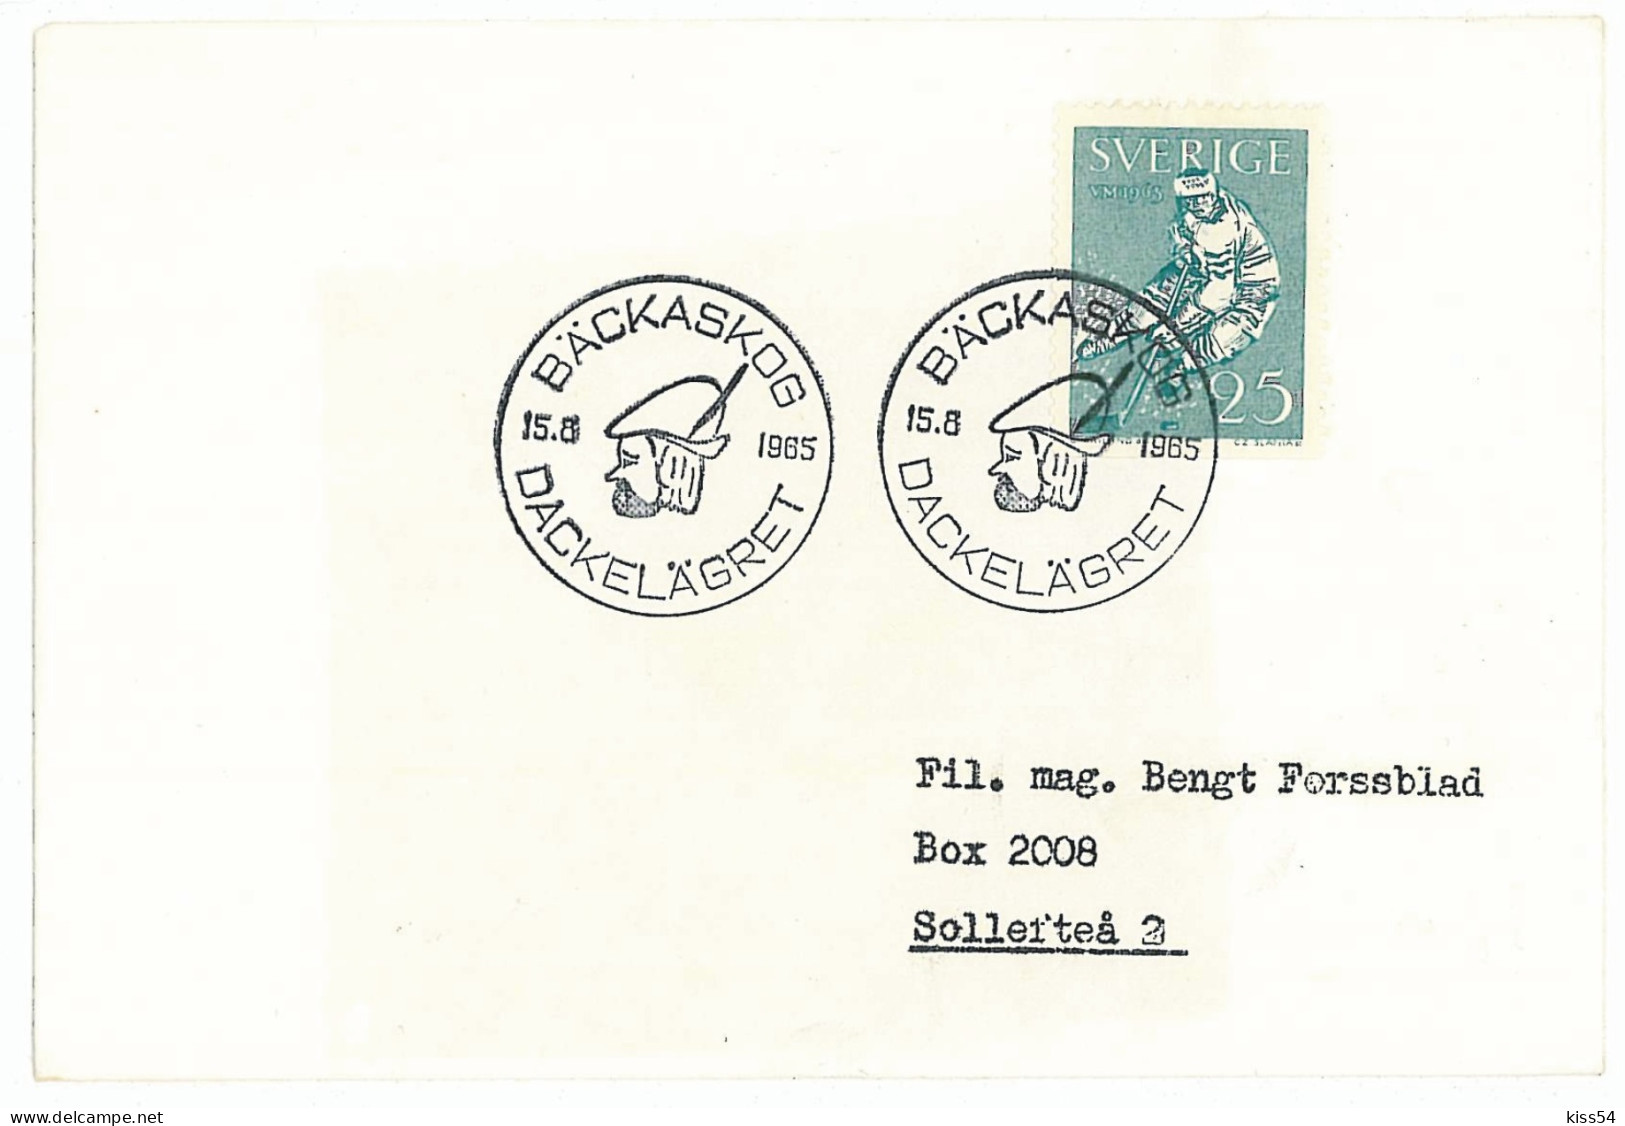 SC 43 - 478 Scout SWEDEN - Cover - Used - 1965 - Covers & Documents